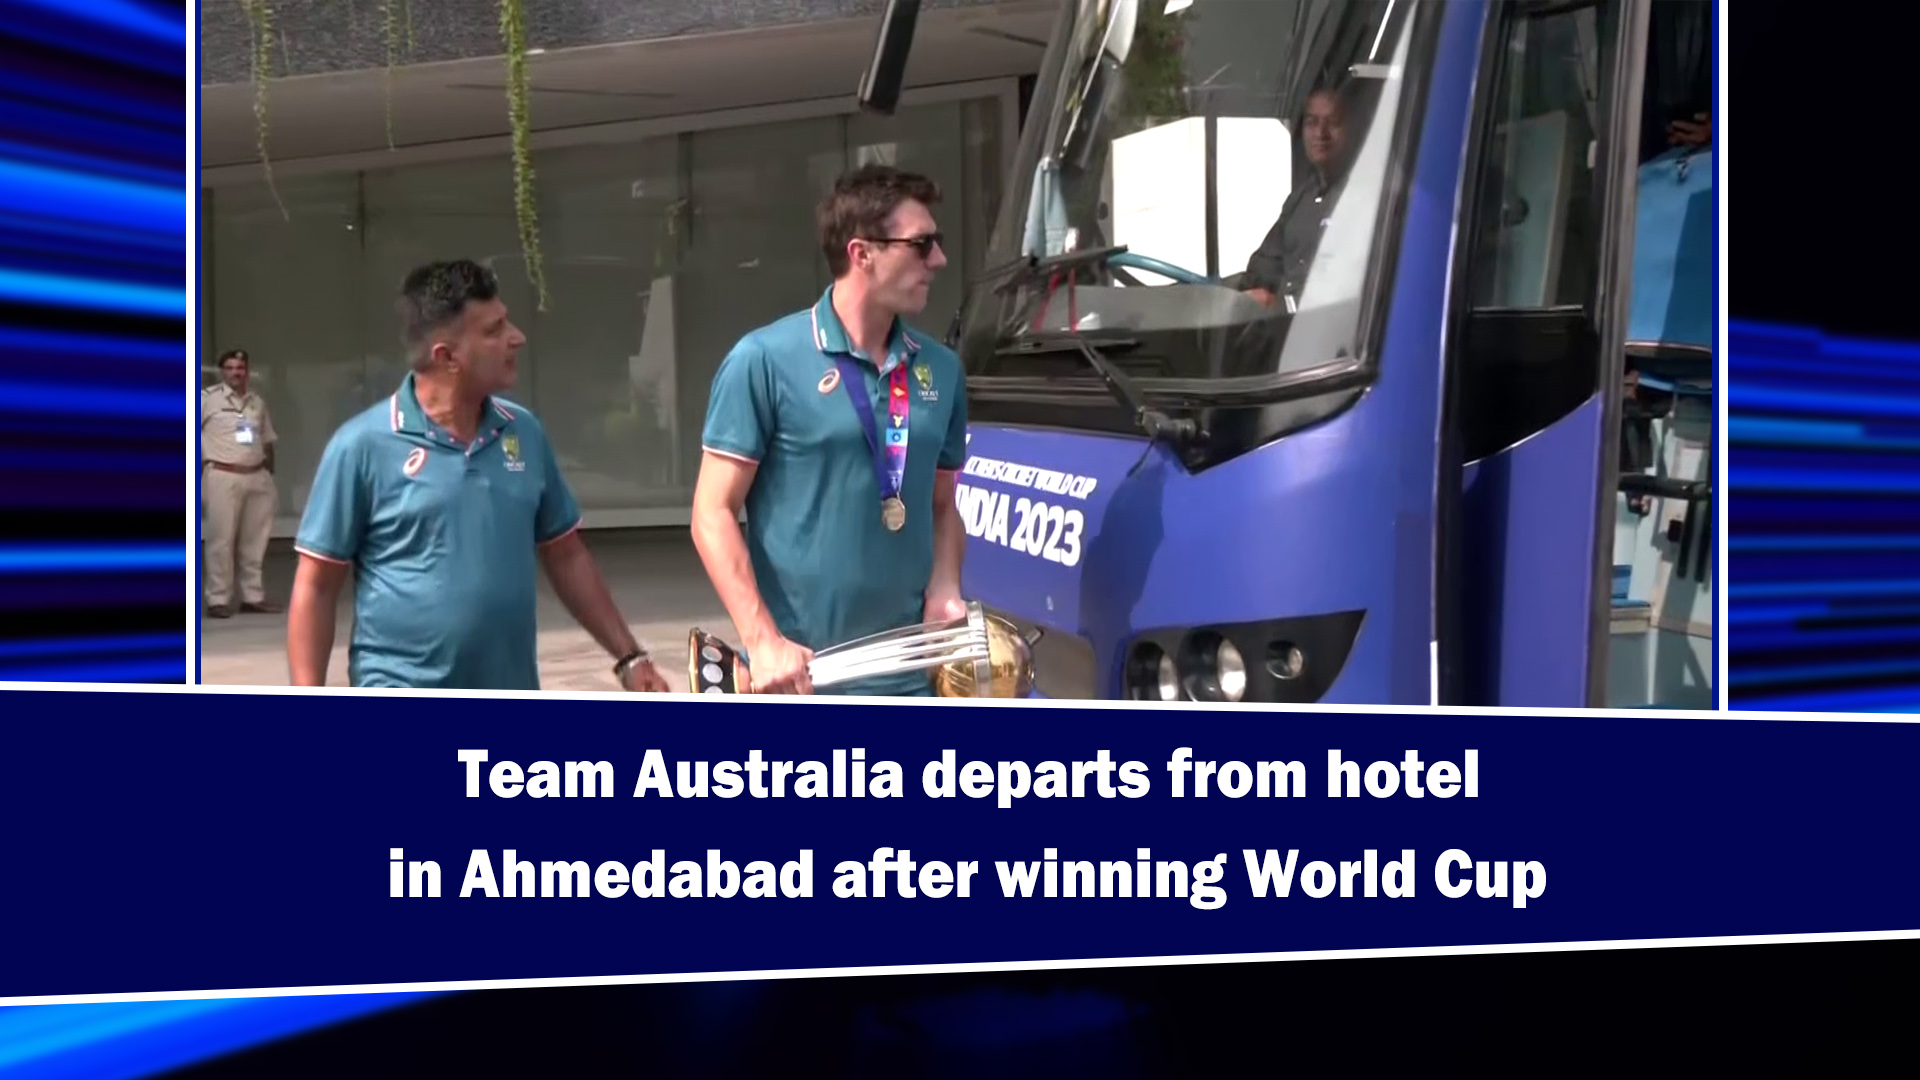 Team Australia departs from hotel in Ahmedabad after winning World Cup